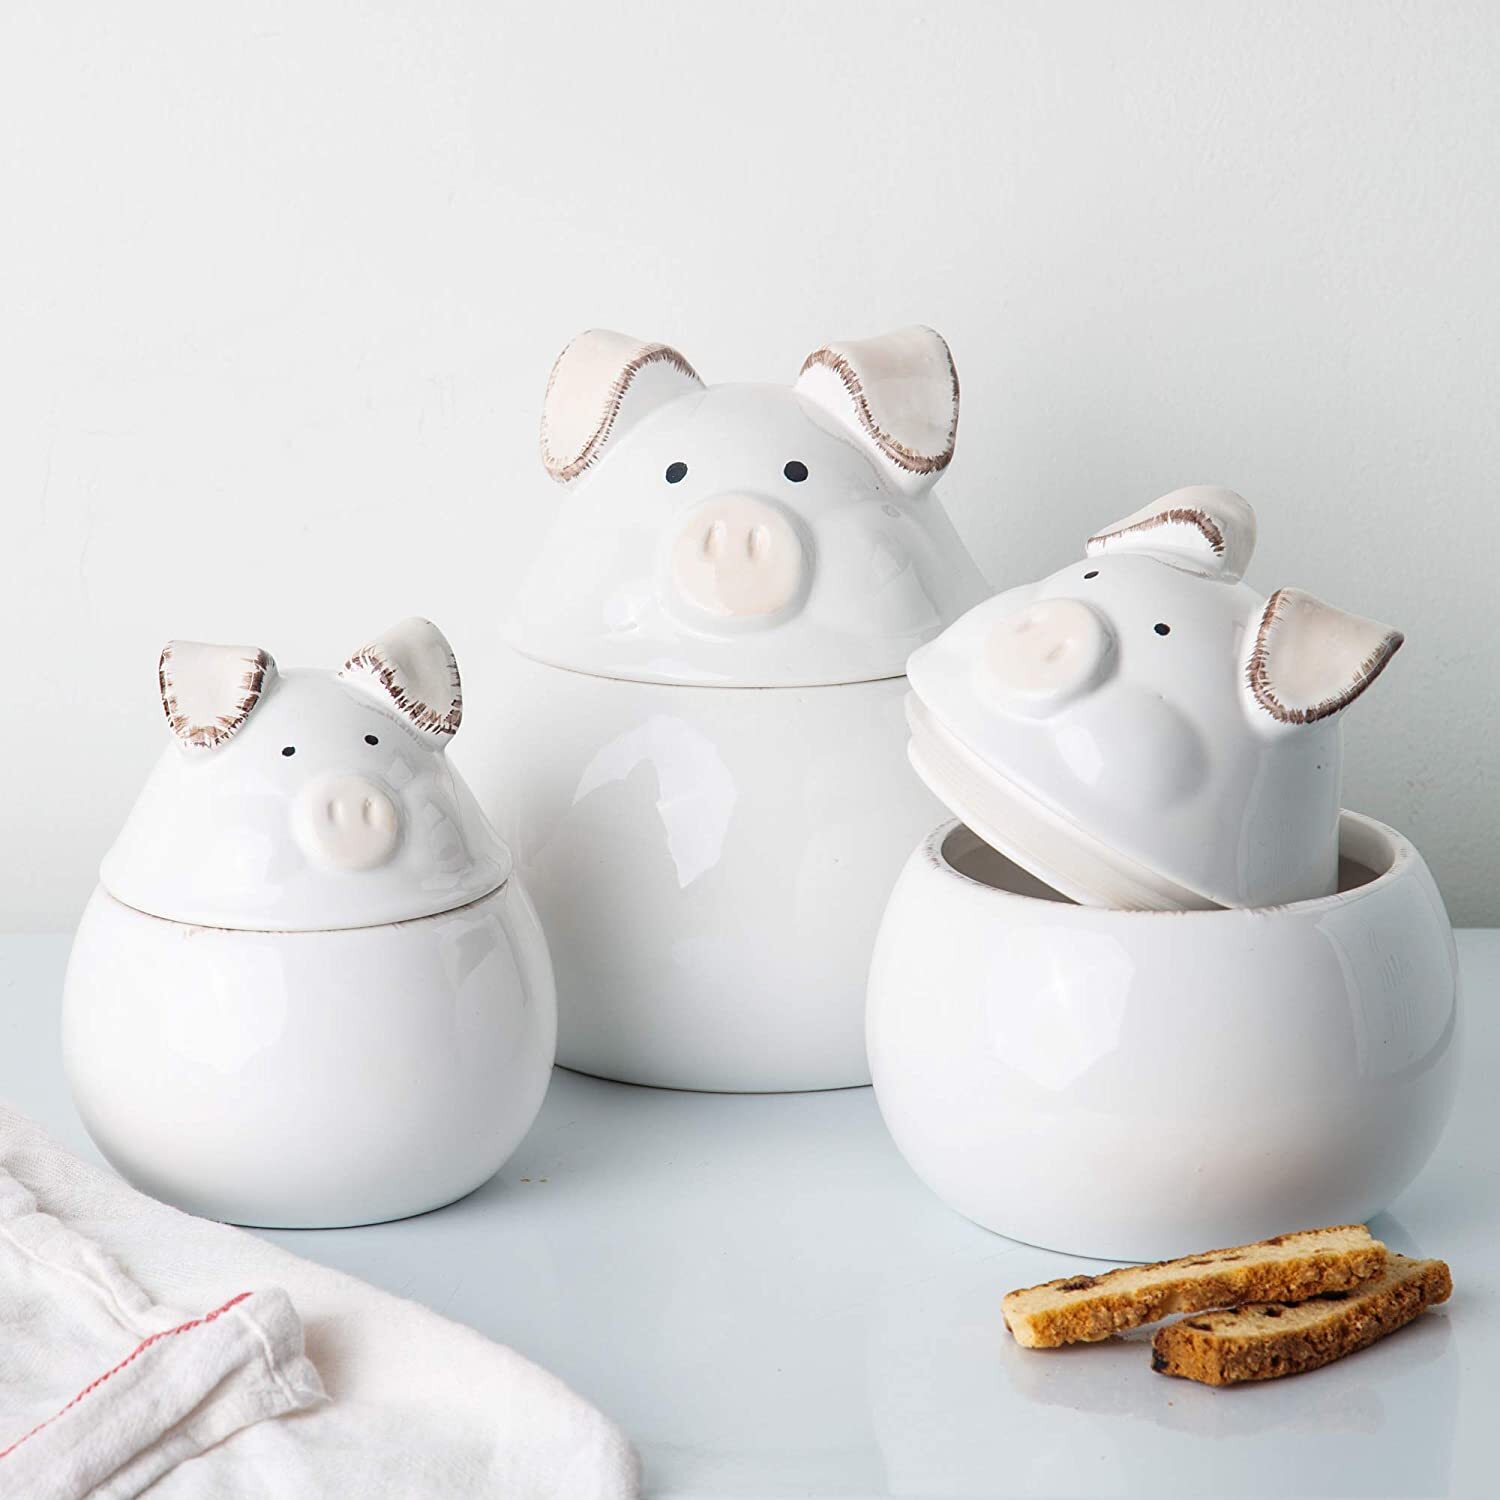 Funny Canisters Made of Pigs